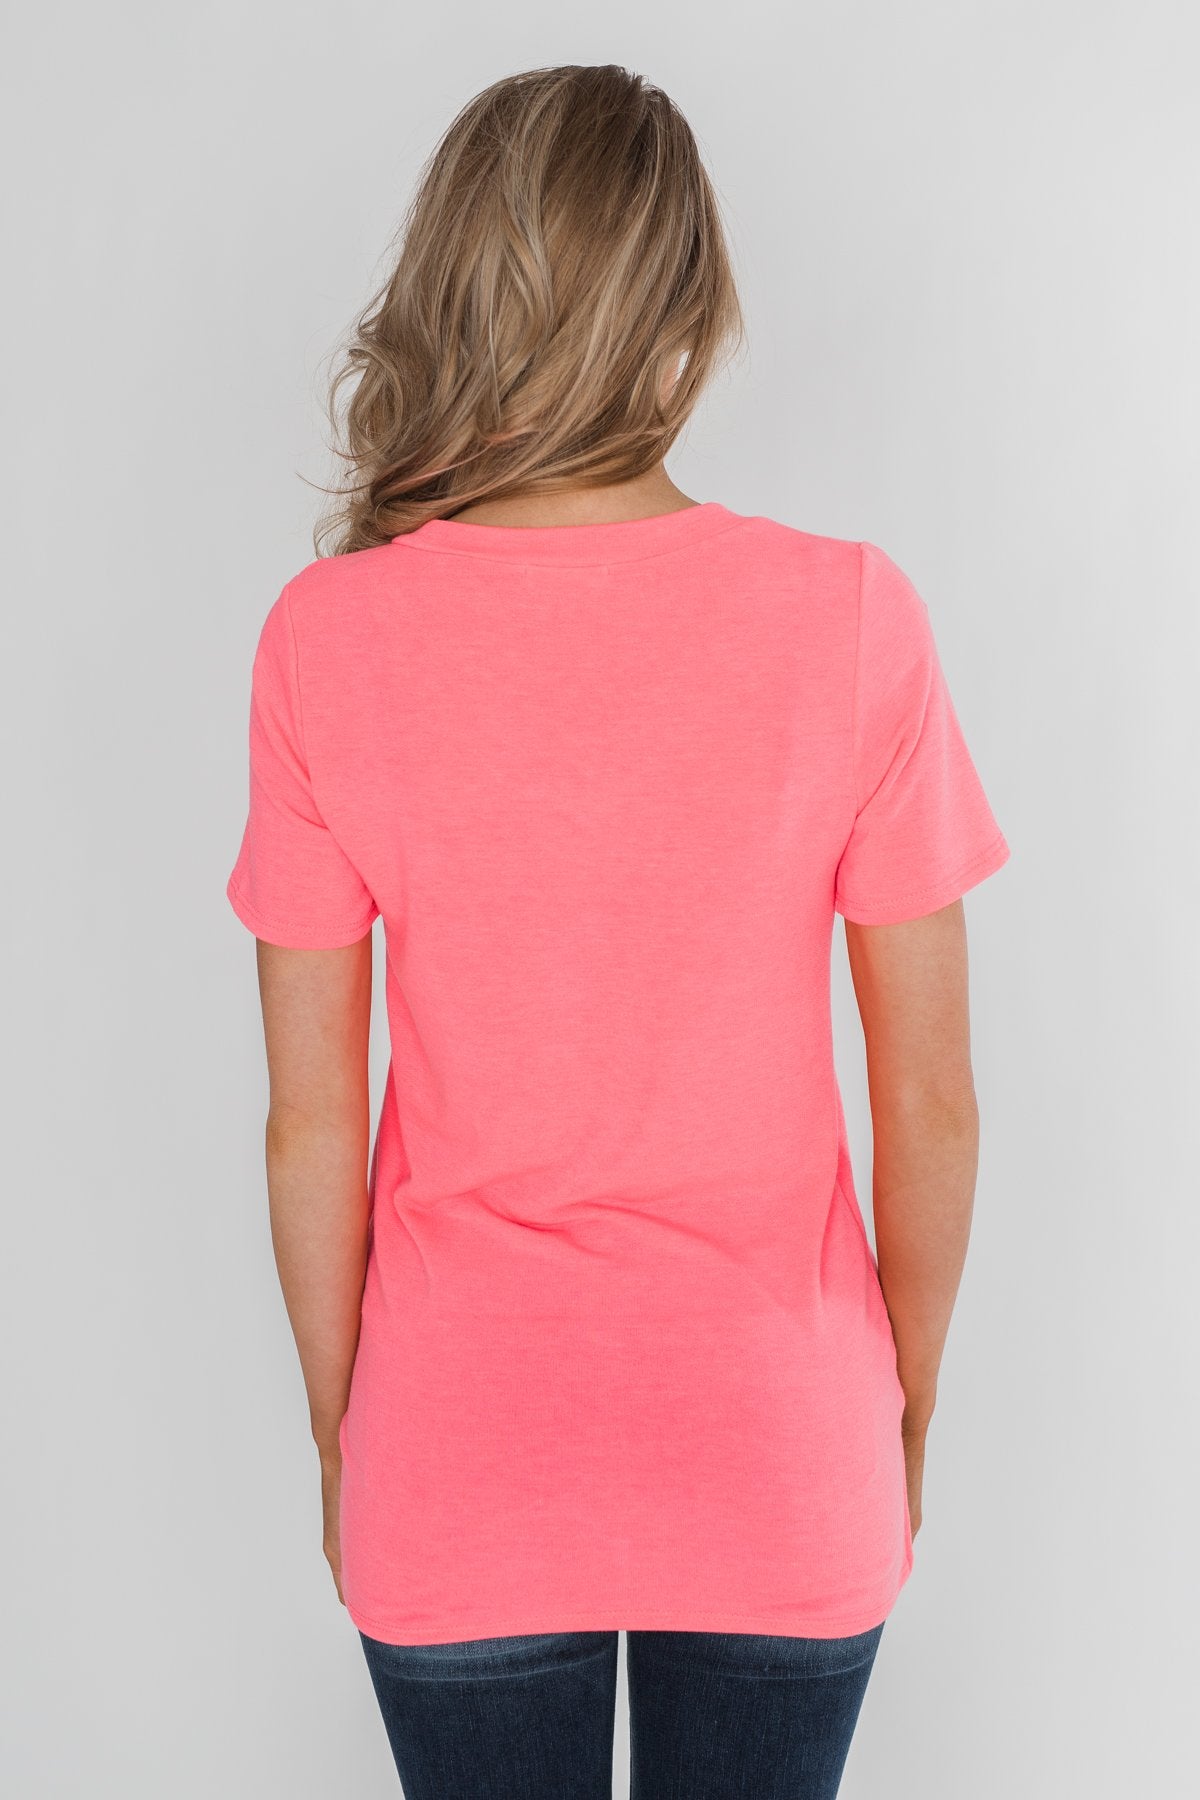 Hint of Leopard Short Sleeve Top - Bright Pink